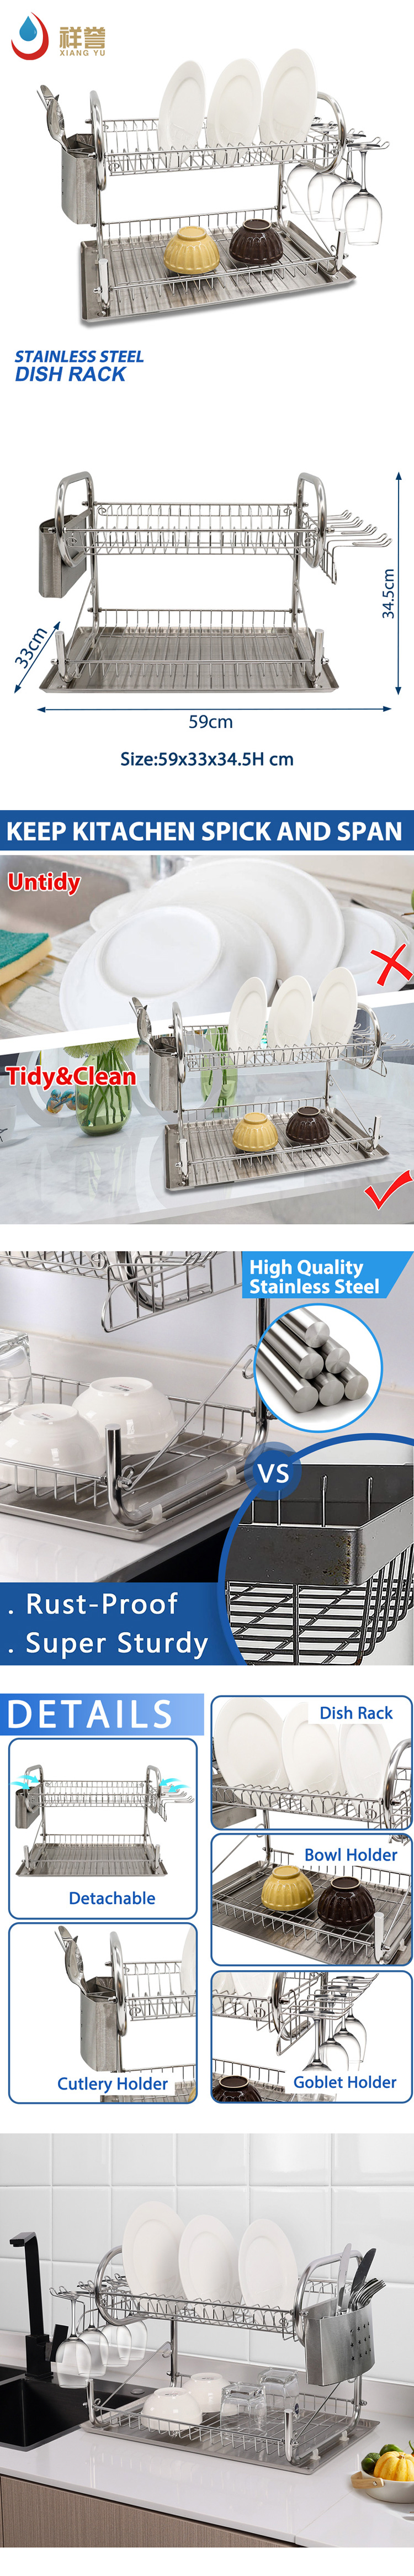 Stainless steel dish drying rack